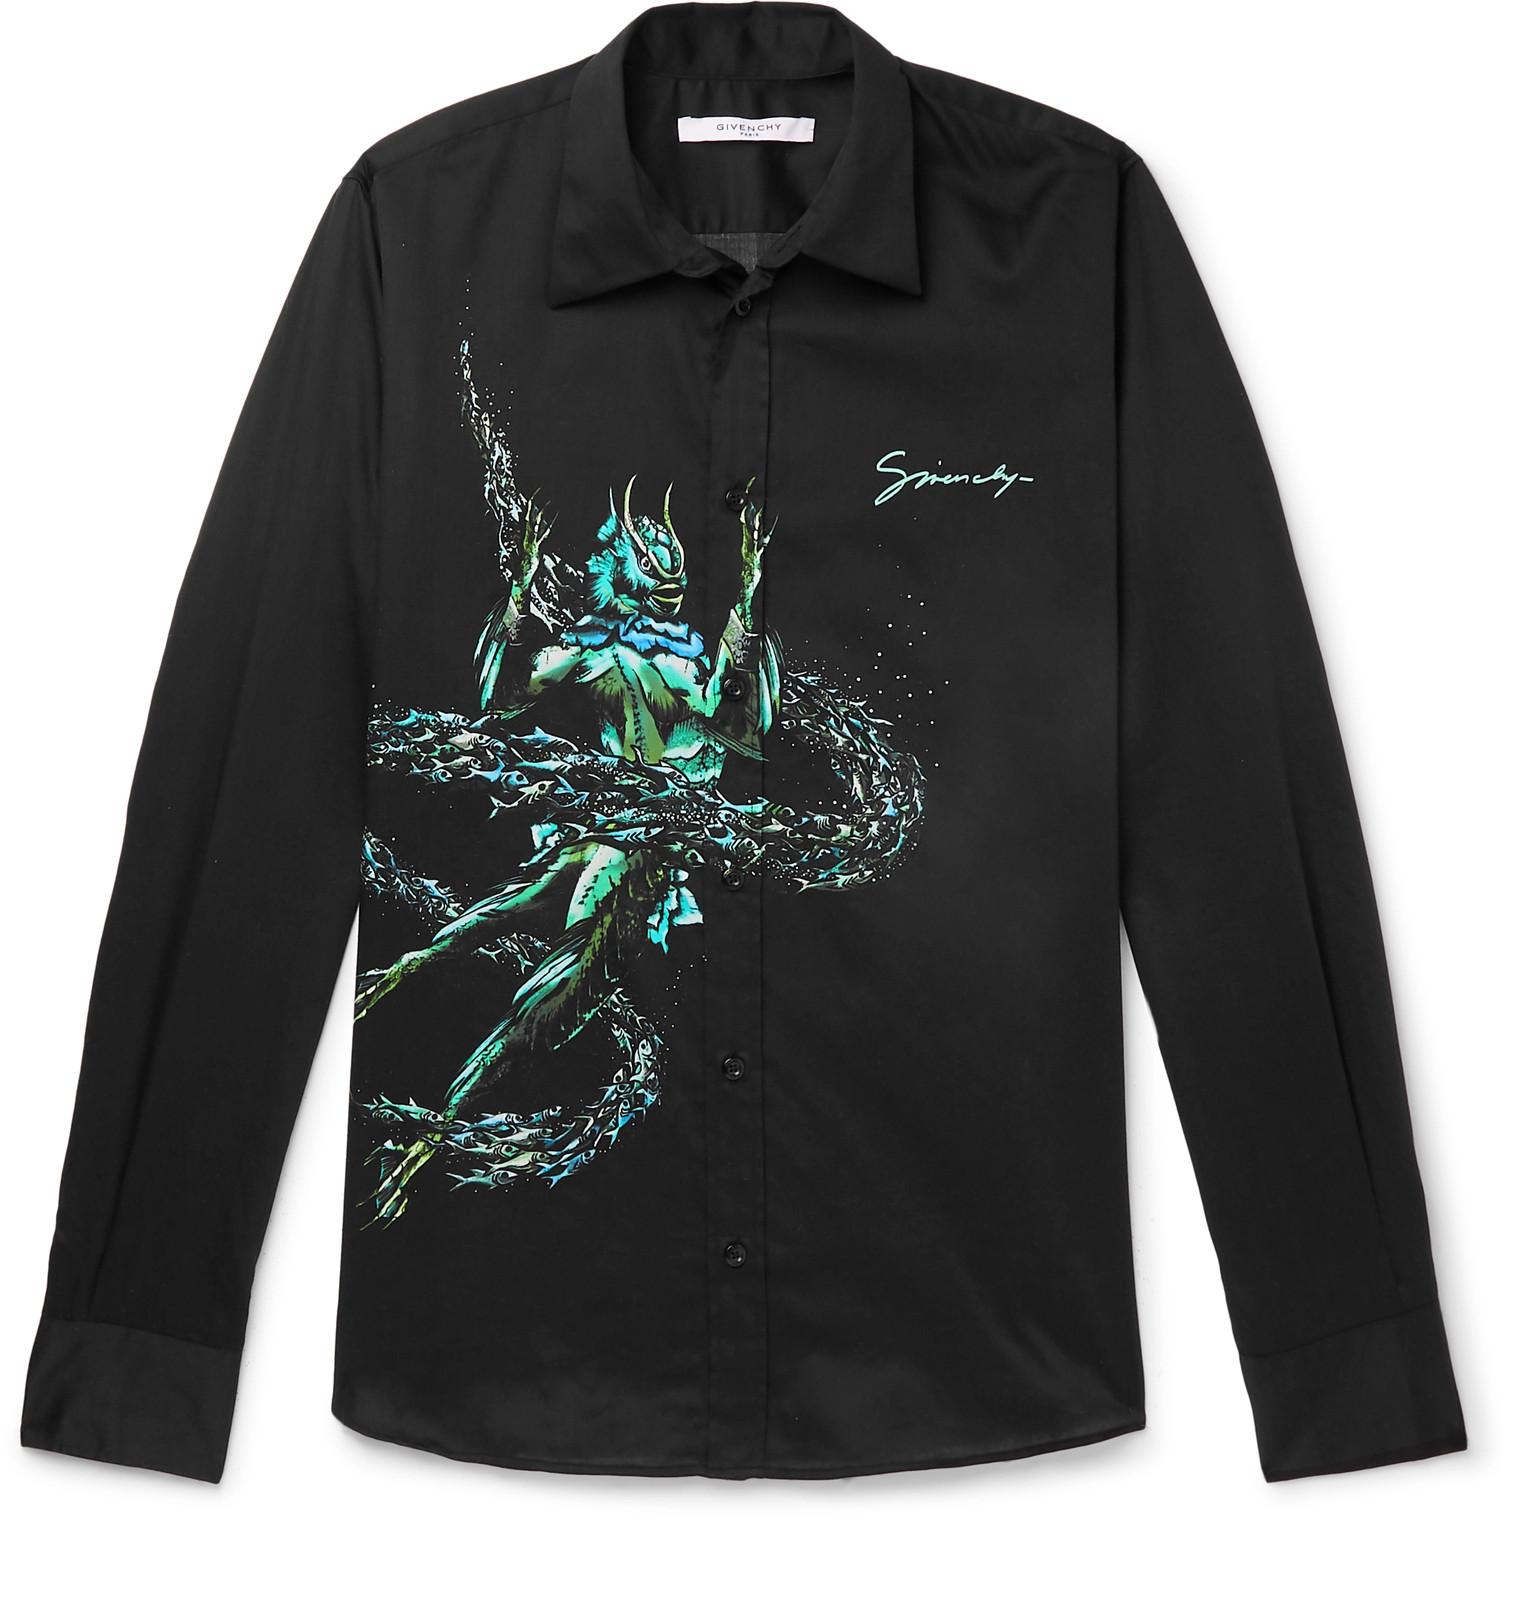 Lyst - Givenchy Slim-fit Printed Cotton Shirt in Black for Men - Save 26%